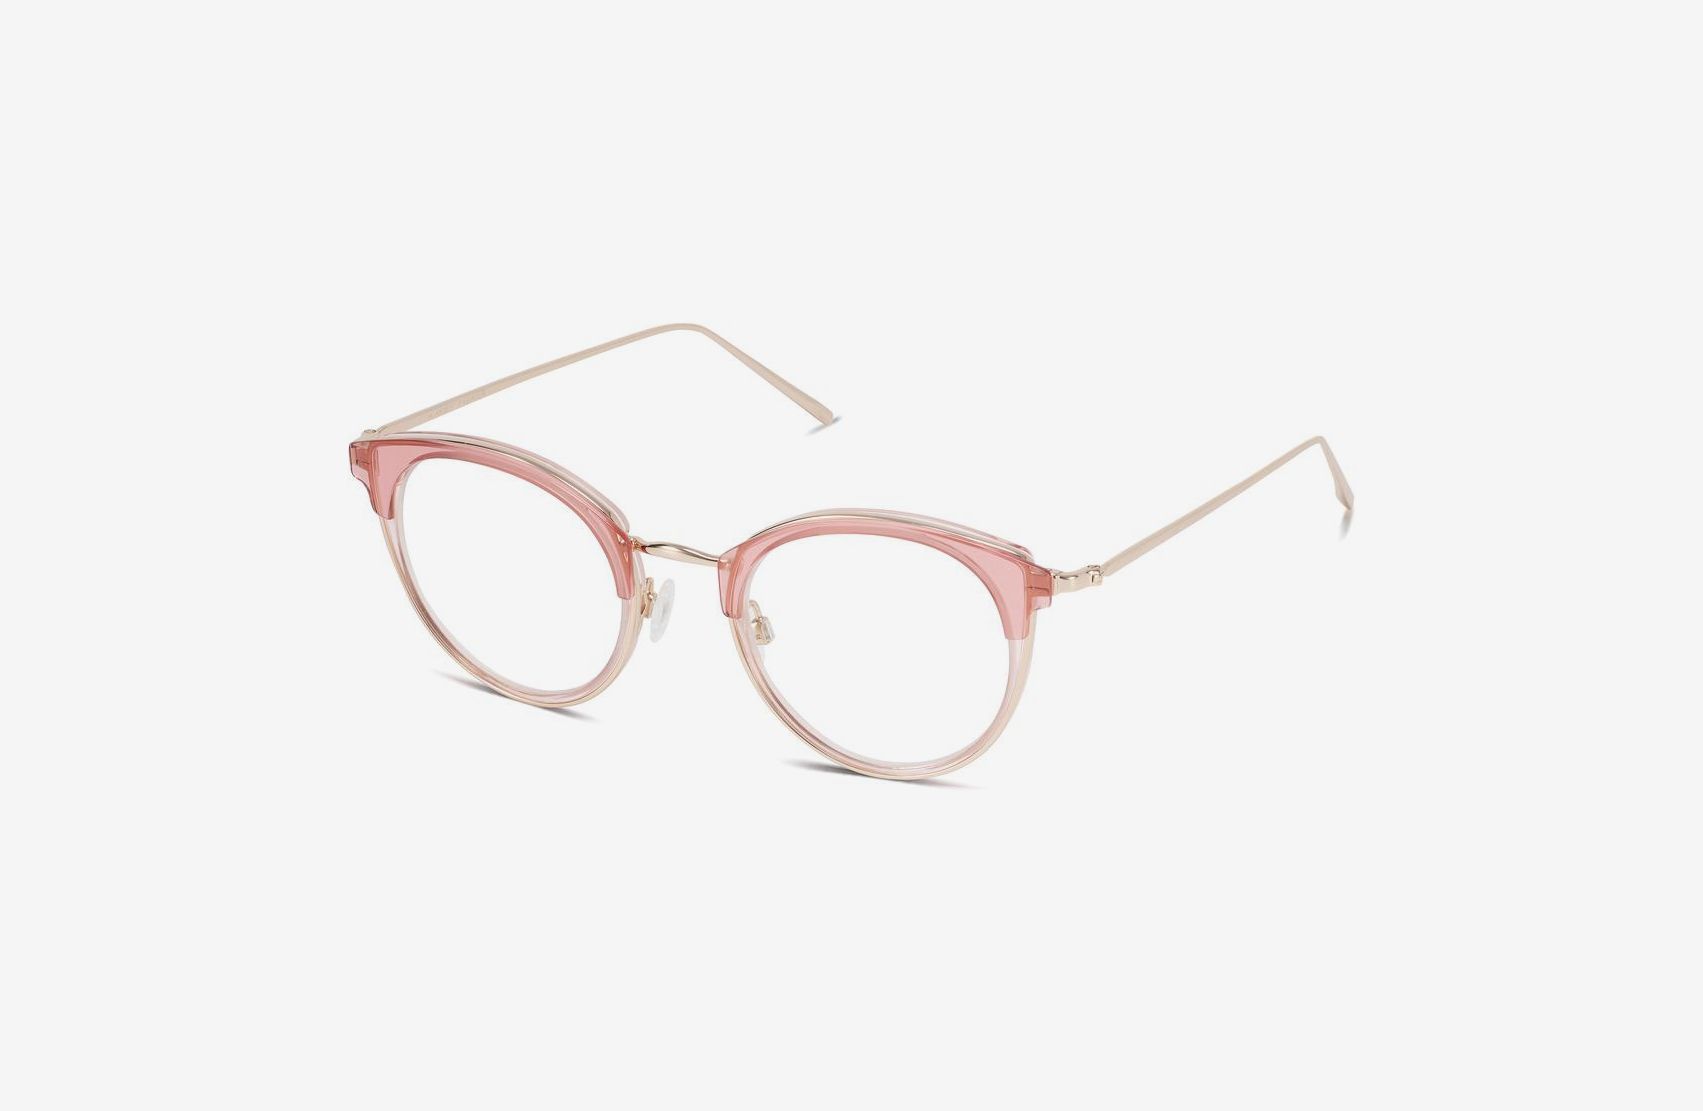 10 recommended stylish cat eye glasses for women